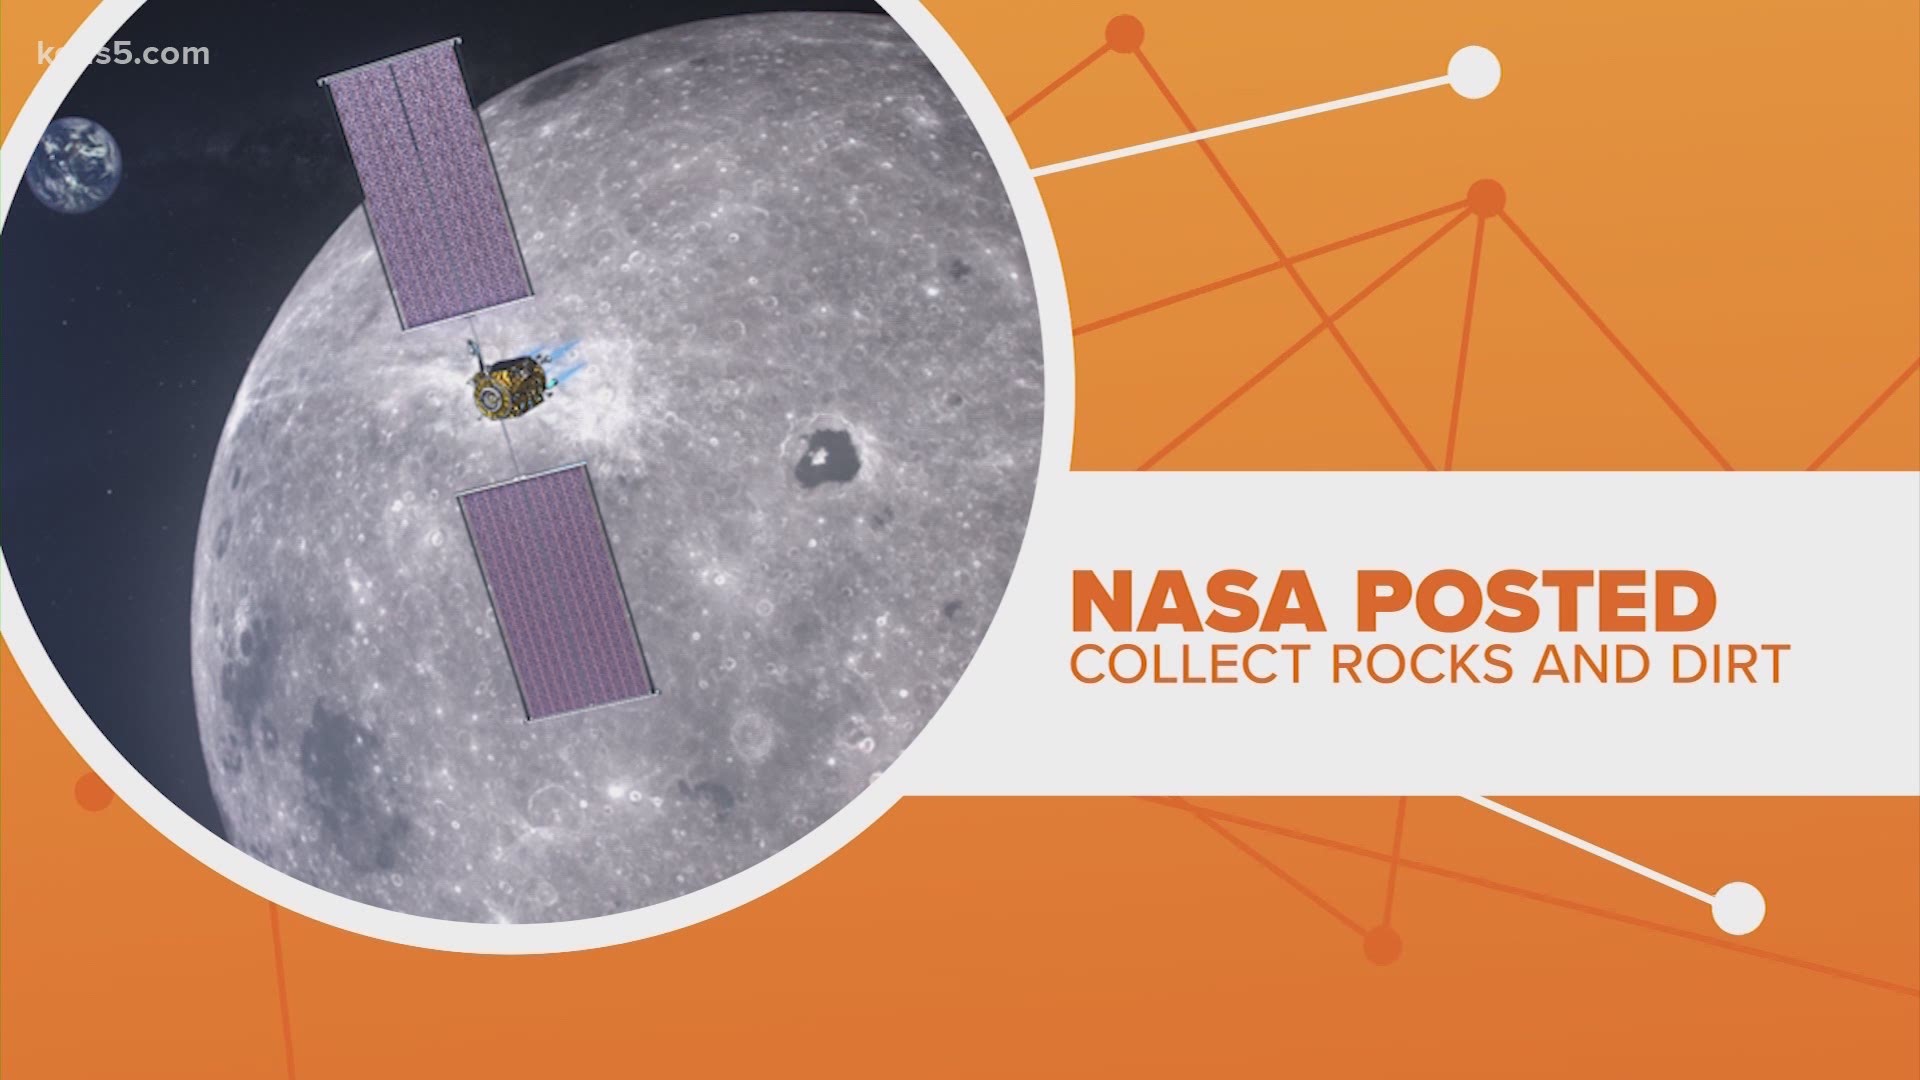 MINING THE MOON | NASA wants samples of rock and dirt from the lunar surface.